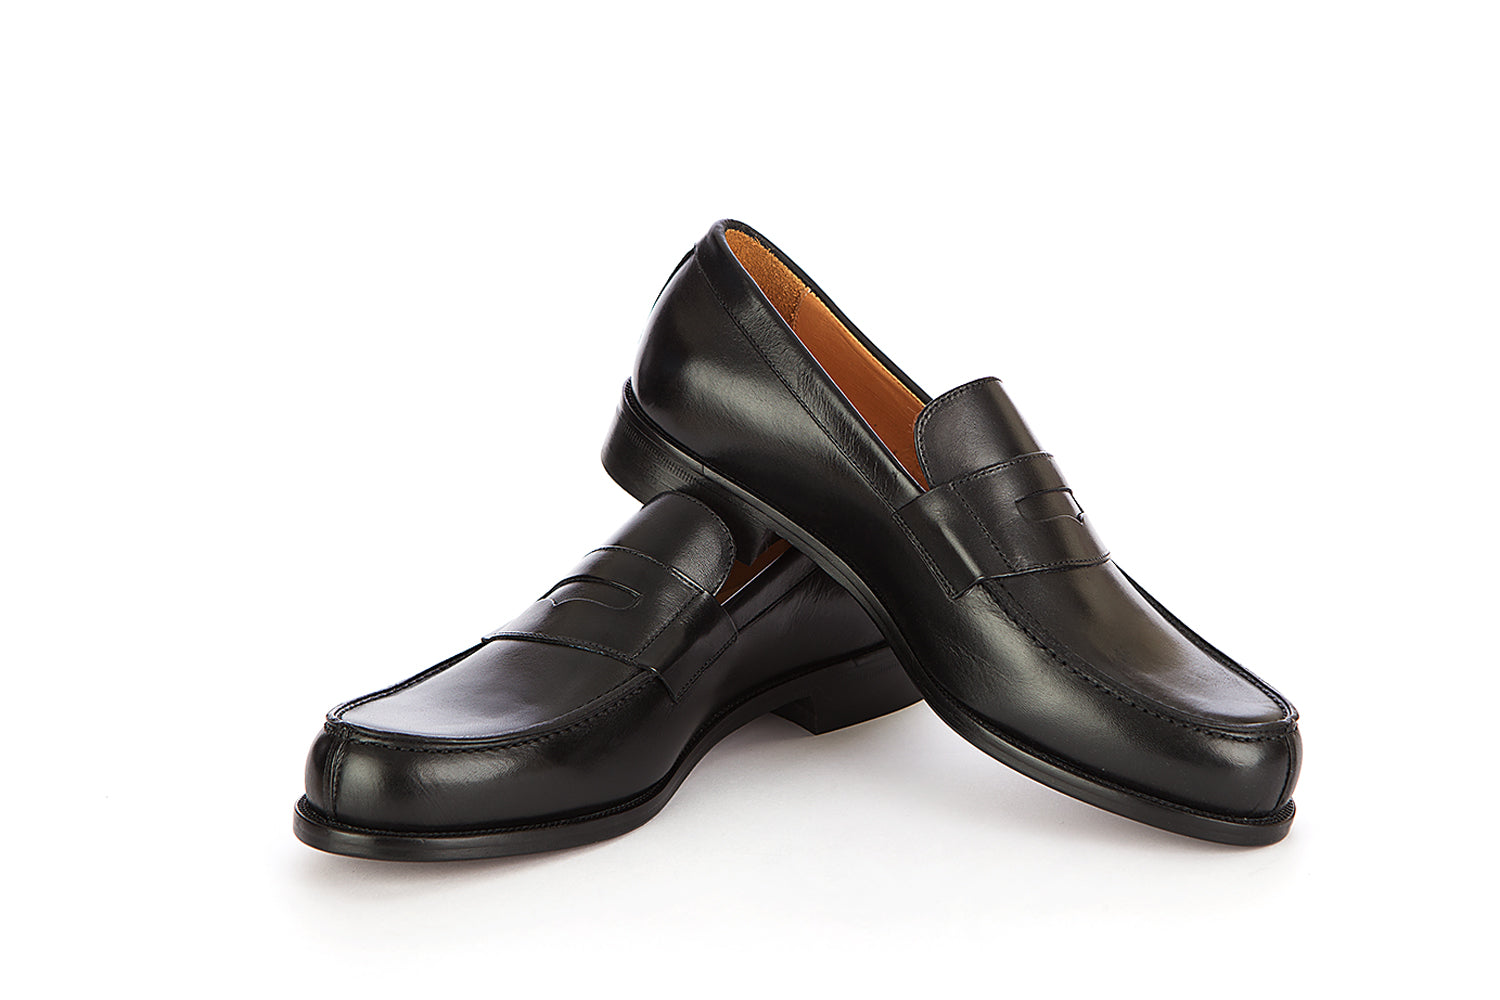 Black Penny Loafers: Italian Penny Loafer Shoes Men – Vittore Italian Shoes